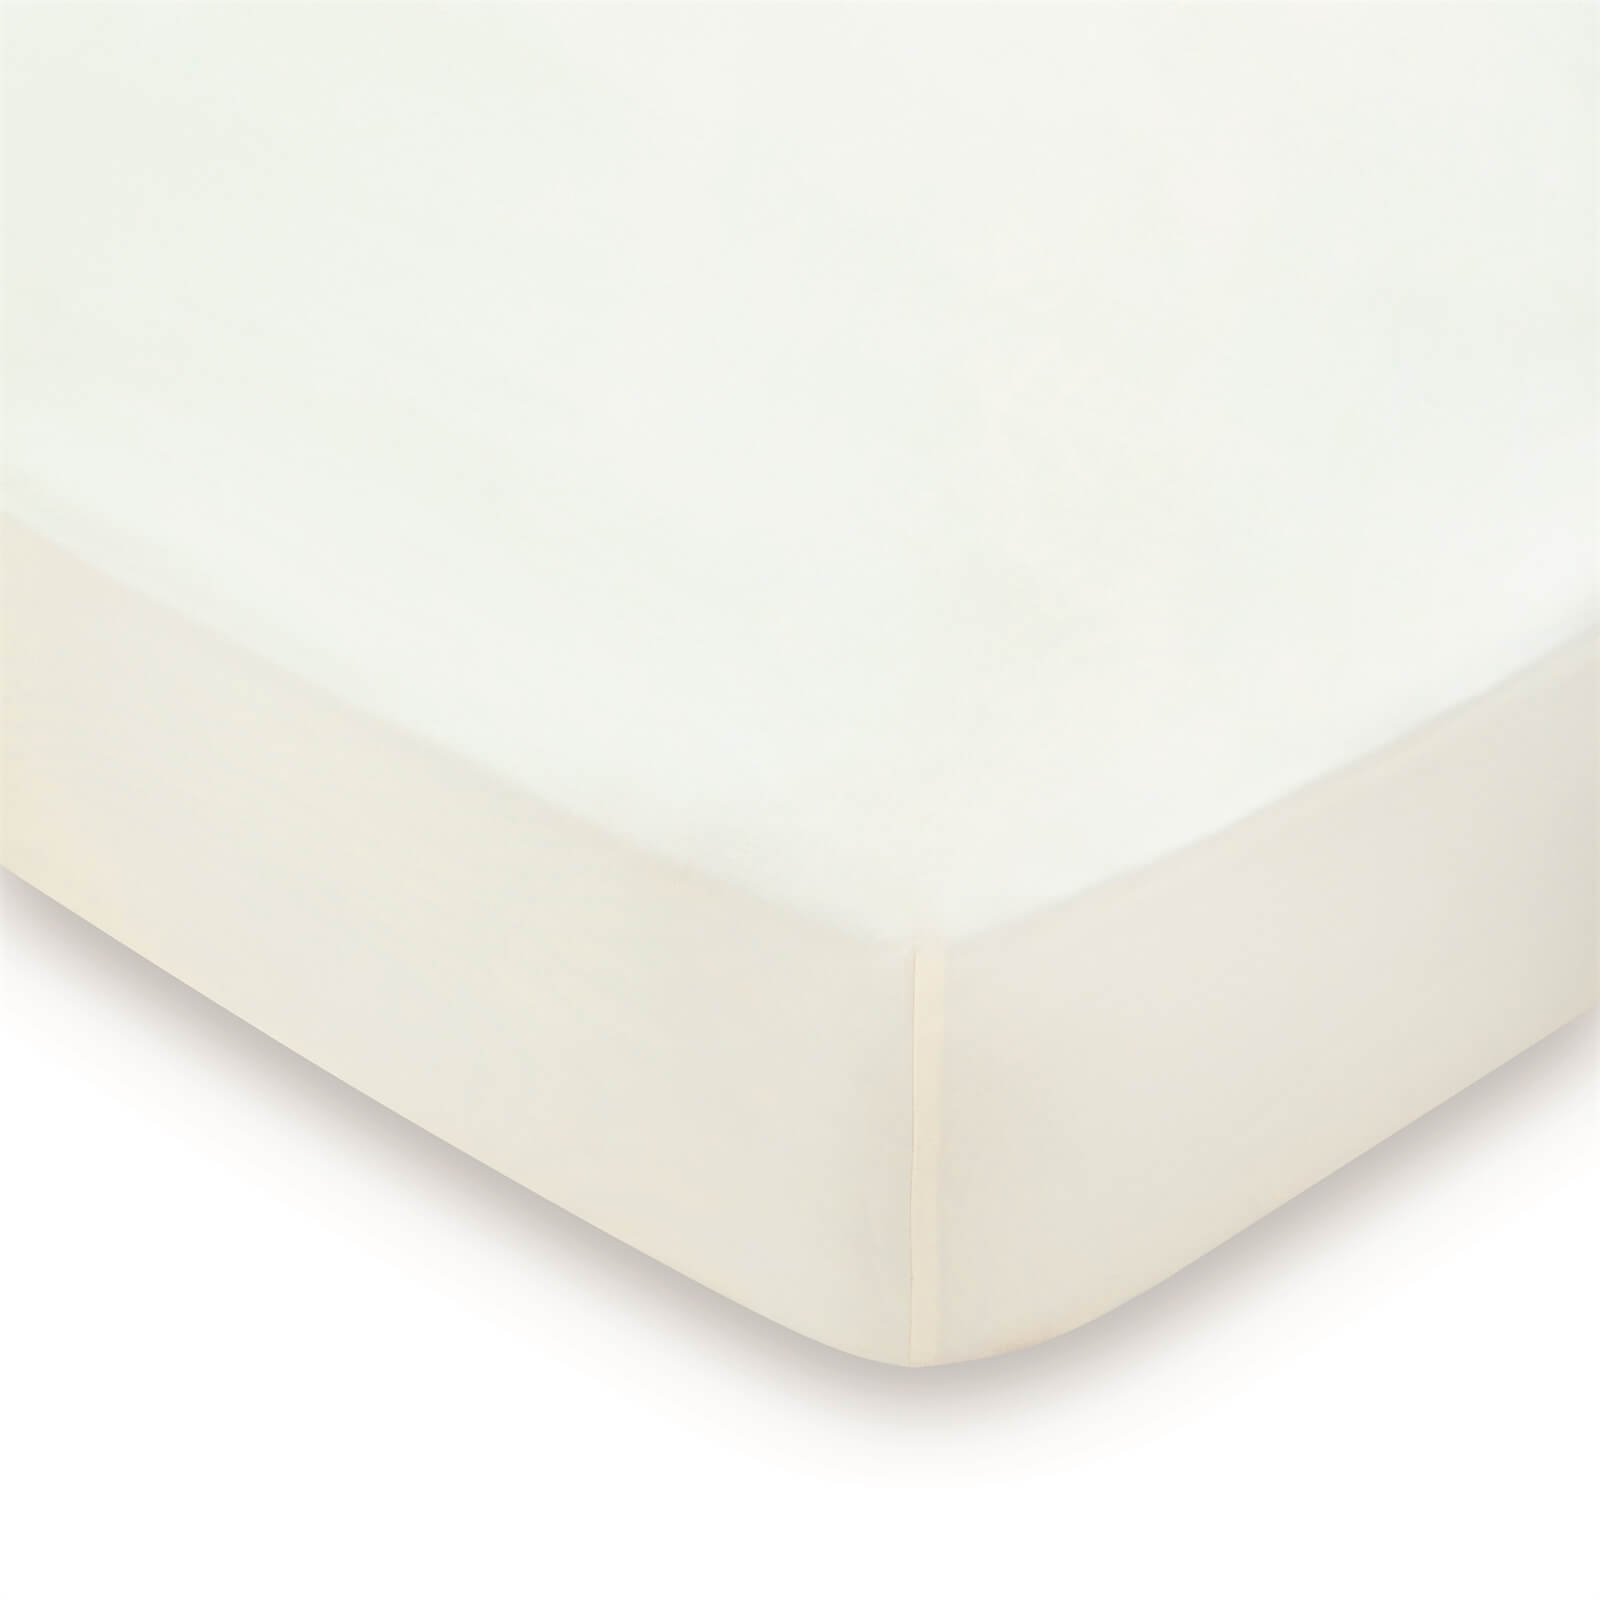 Peacock Blue Hotel 600 Thread Count Plain Dye Fitted Sheet - King - Ivory